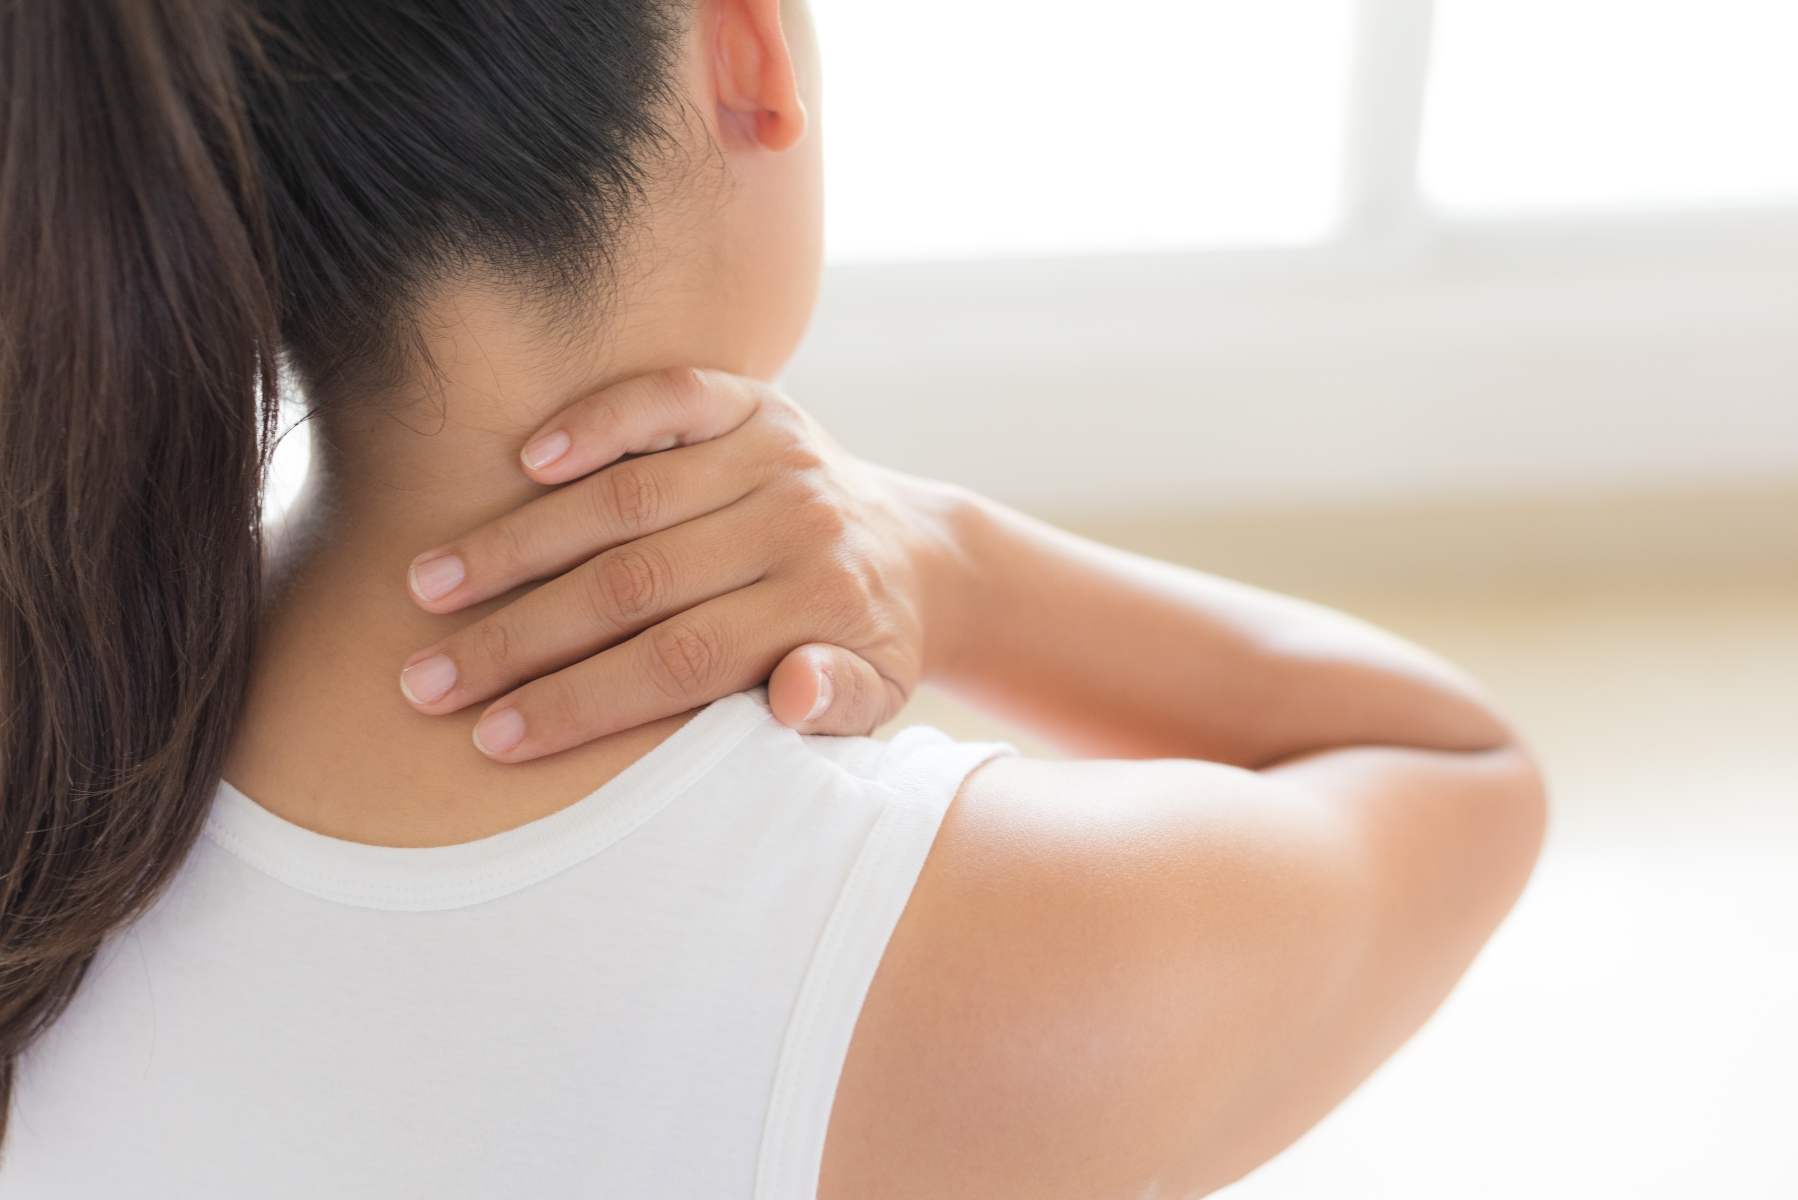 My Neck Hurts and My Hands Don’t Seem to Work Right…is it Cervical Myelopathy?